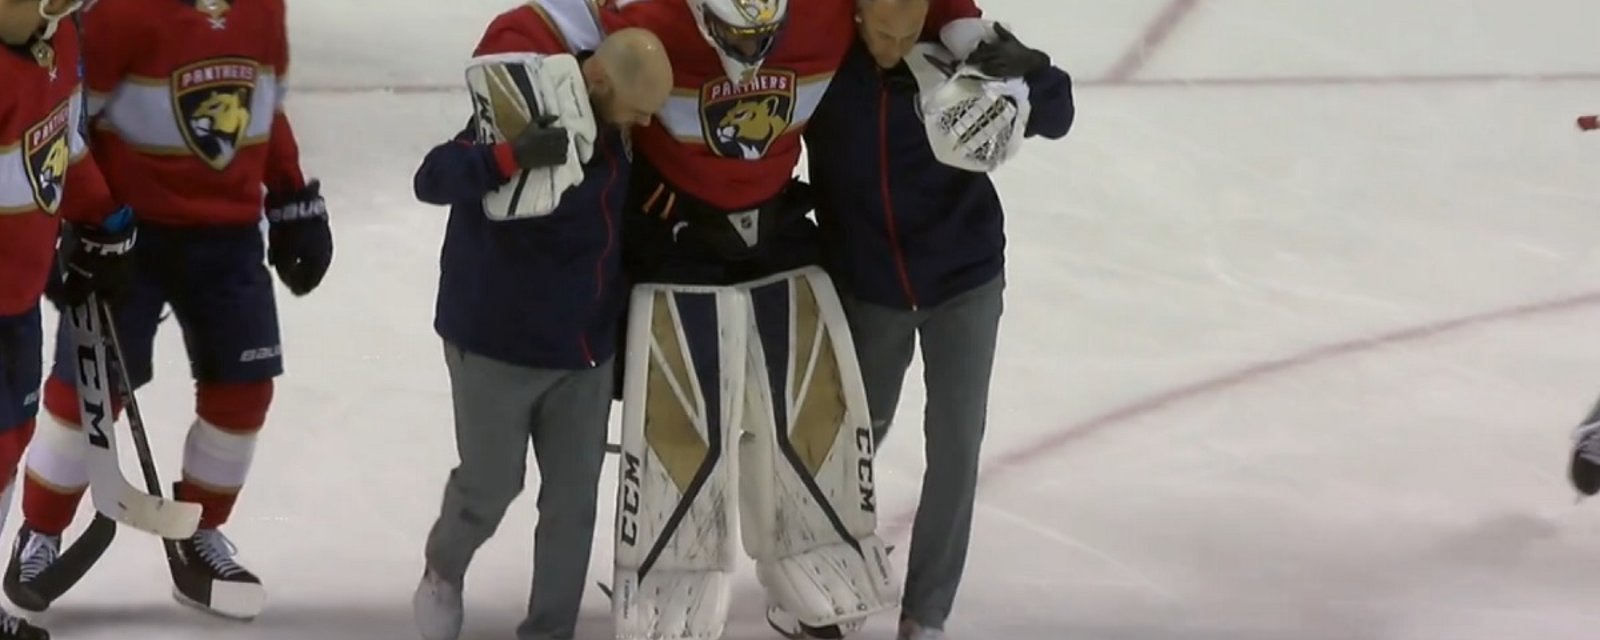 Breaking: the worst is confirmed for Luongo...